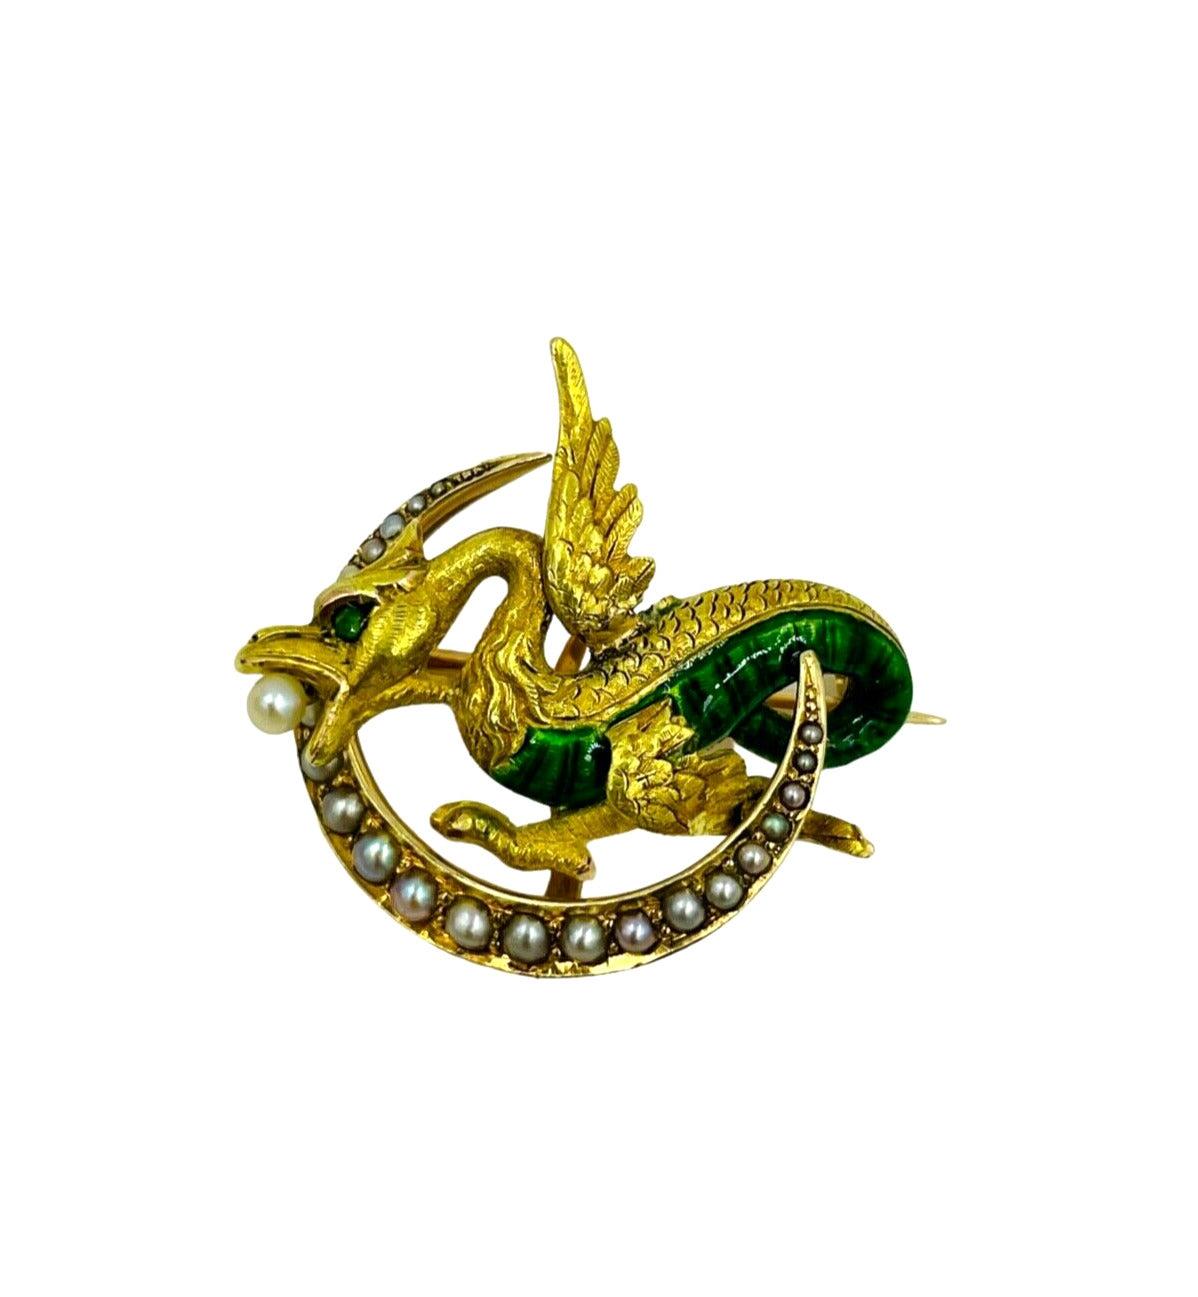 Antique Art Nouveau 14k Winged Dragon/Griffin Pin, Pearls, Green Eye